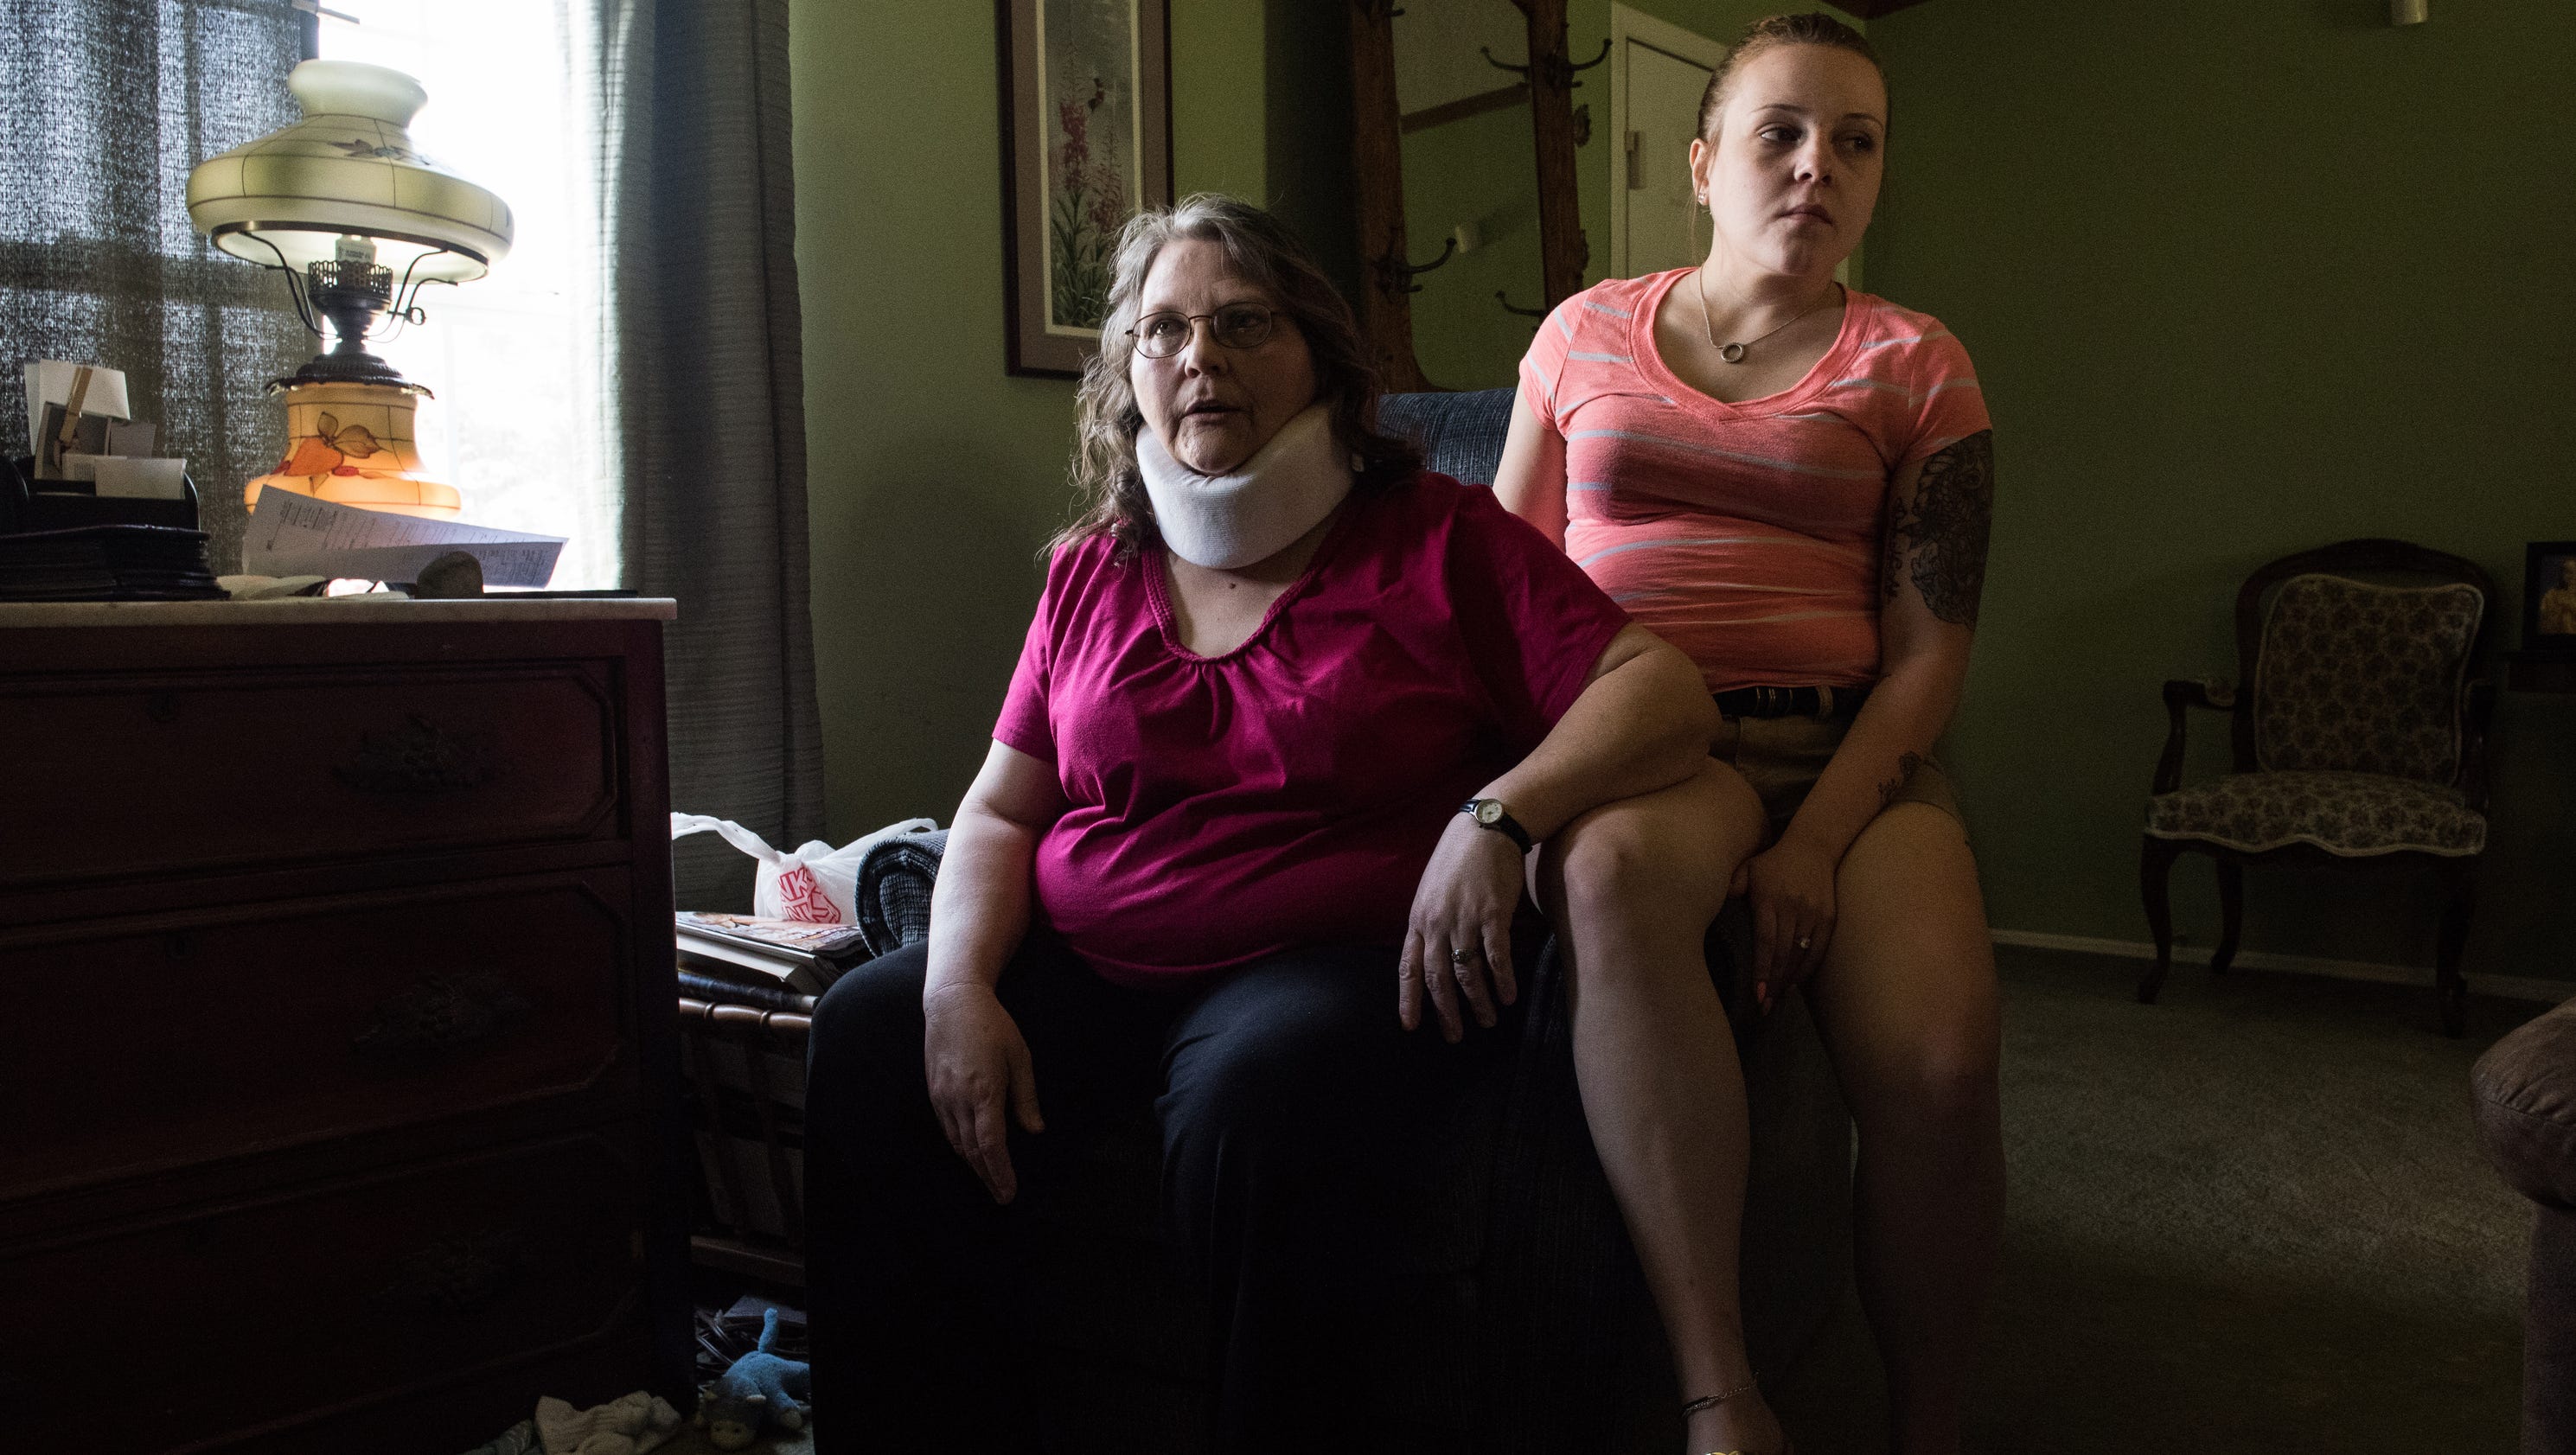 In Accomack, Virginia's health insurance wasteland, Medicaid expansion may offer lifeline